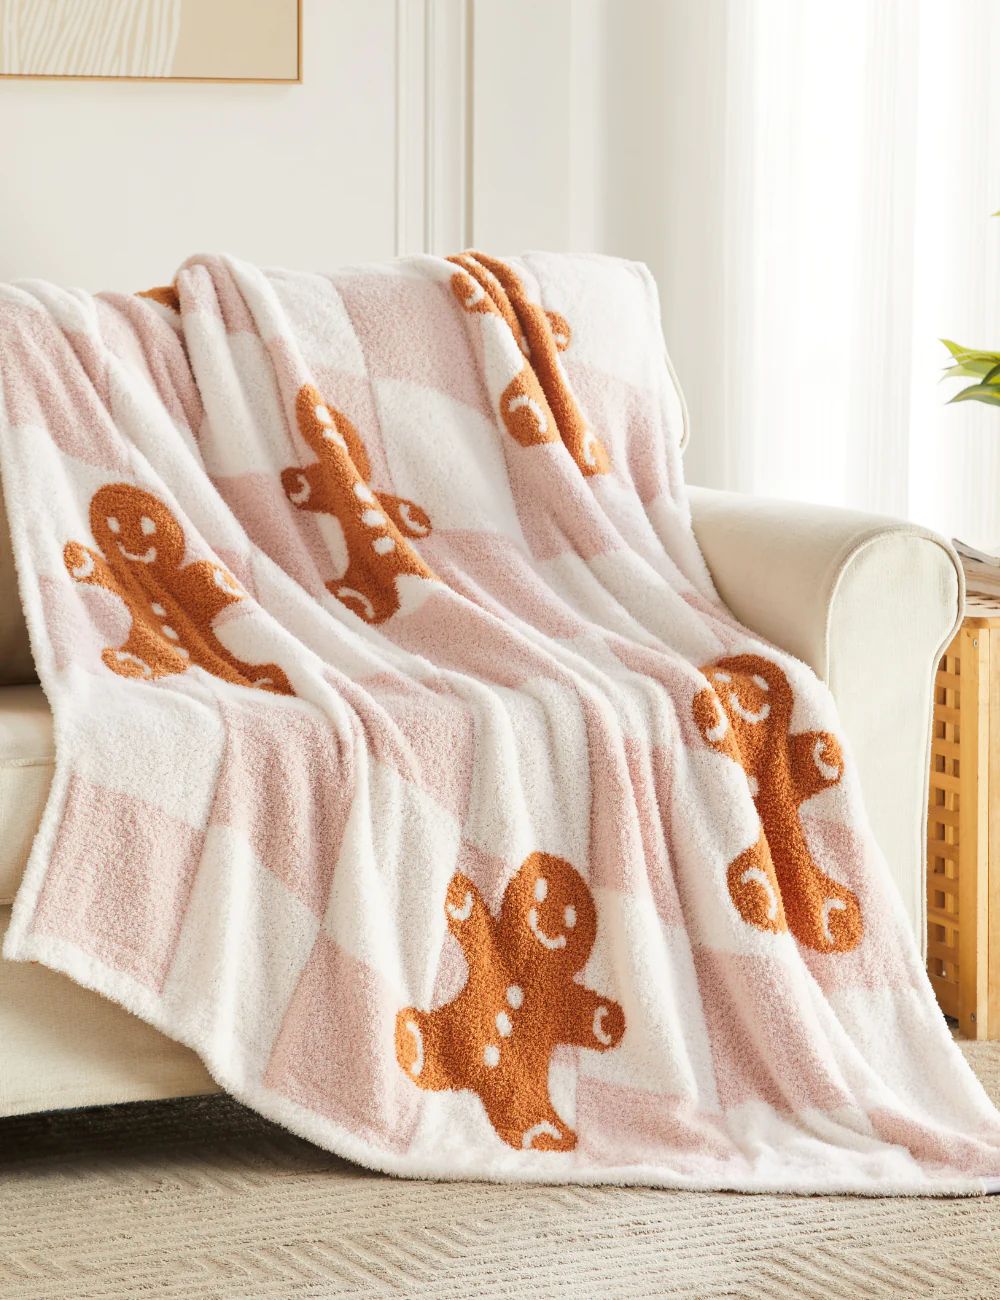 TSC x Madi Nelson: Gingerbread Checkered Buttery Blanket- Pre-Order 11-30 or sooner | The Styled Collection